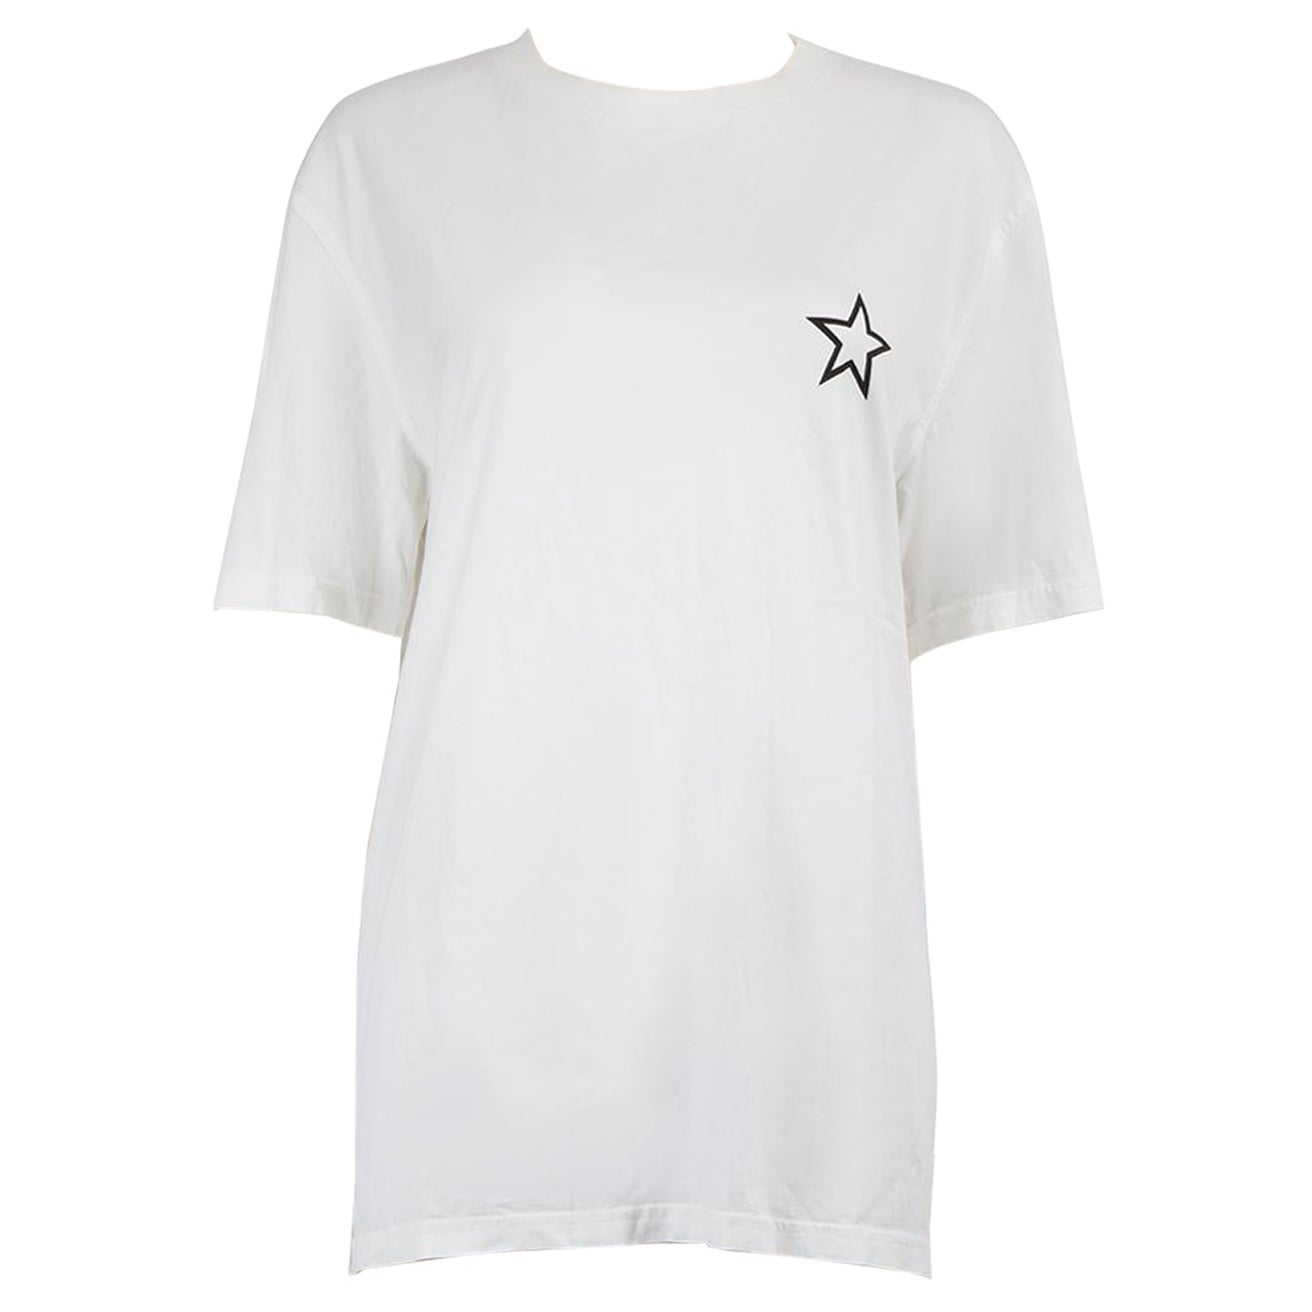 Givenchy White Cuban Printed Star T-Shirt Size M For Sale